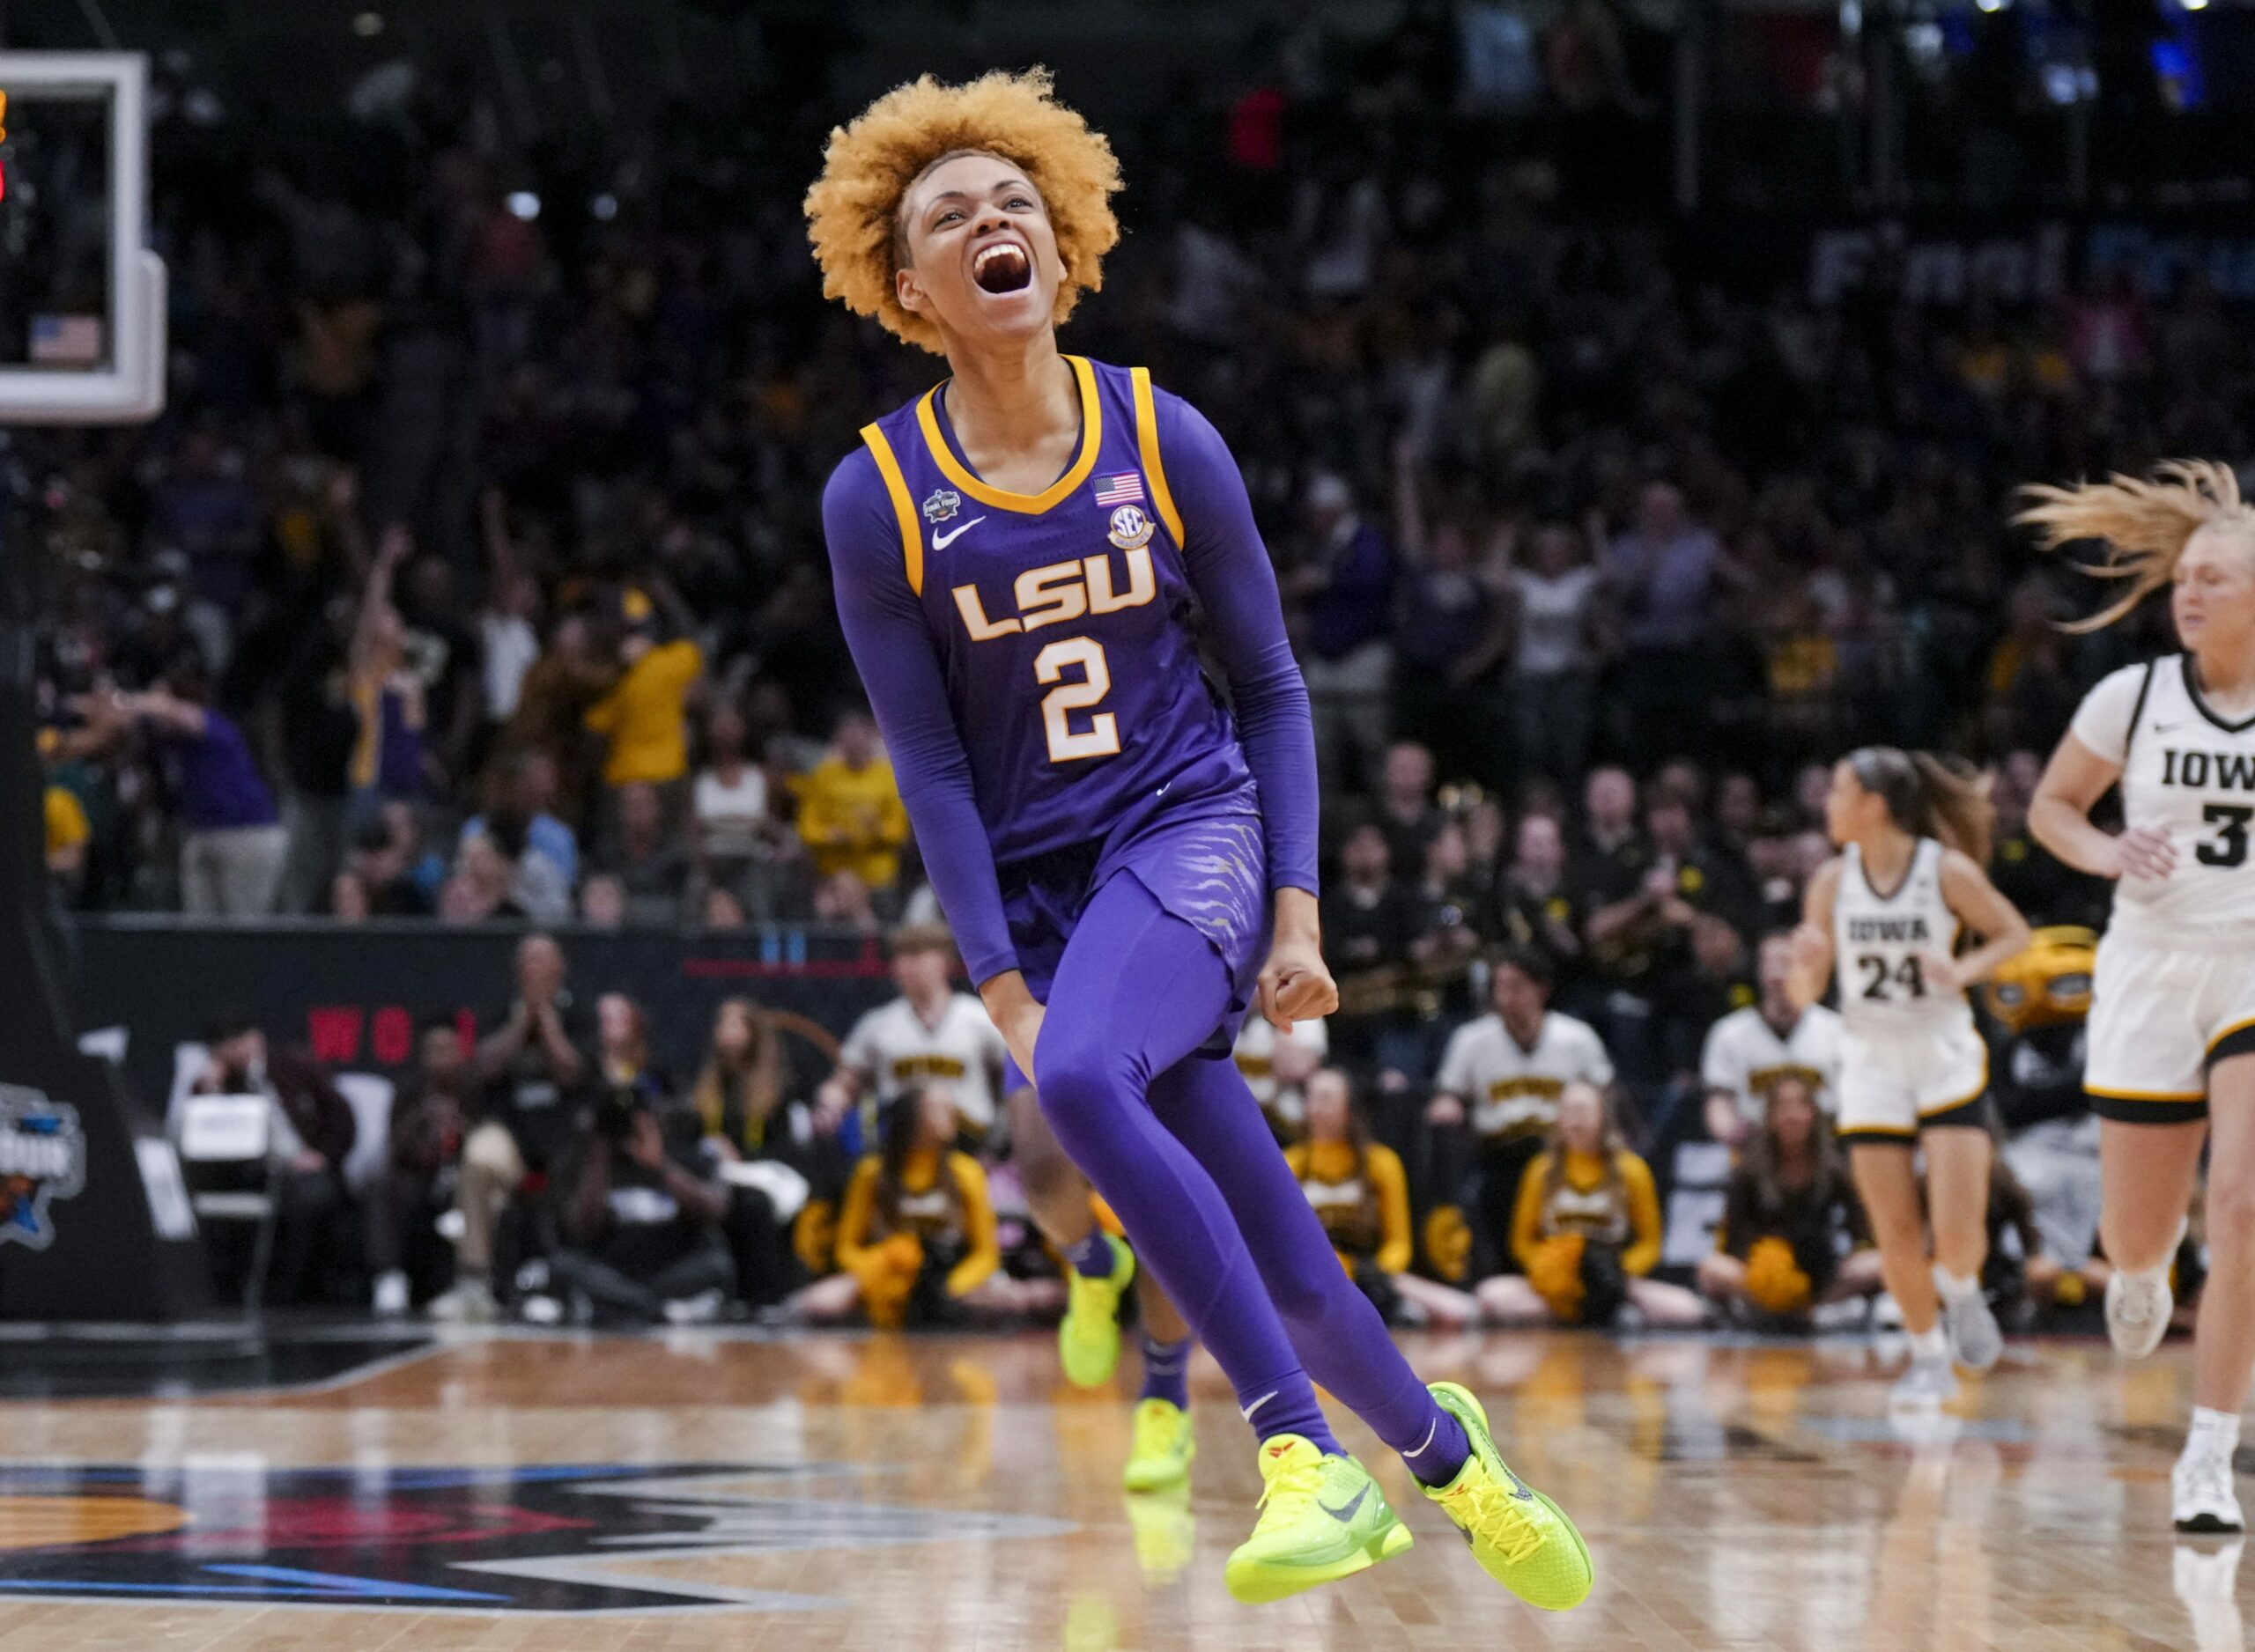 LSU’s national championship game set viewing records